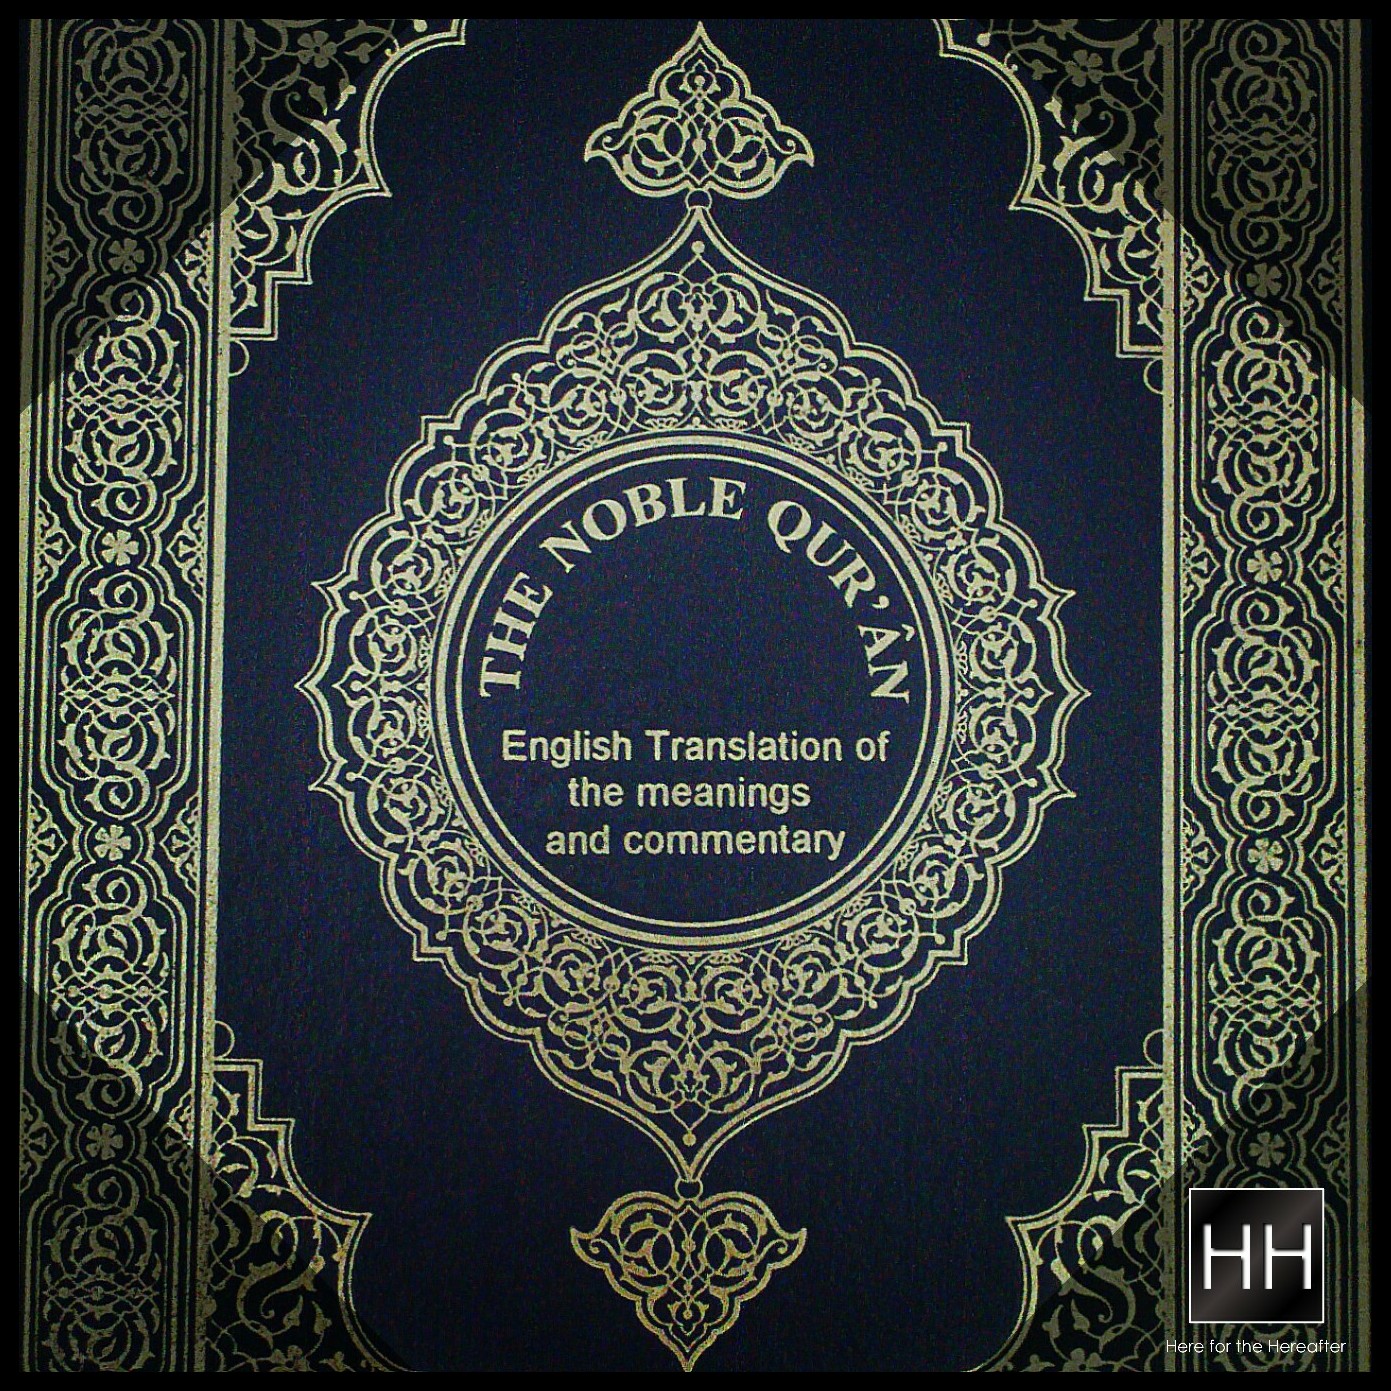 The English translation of the Noble Quran